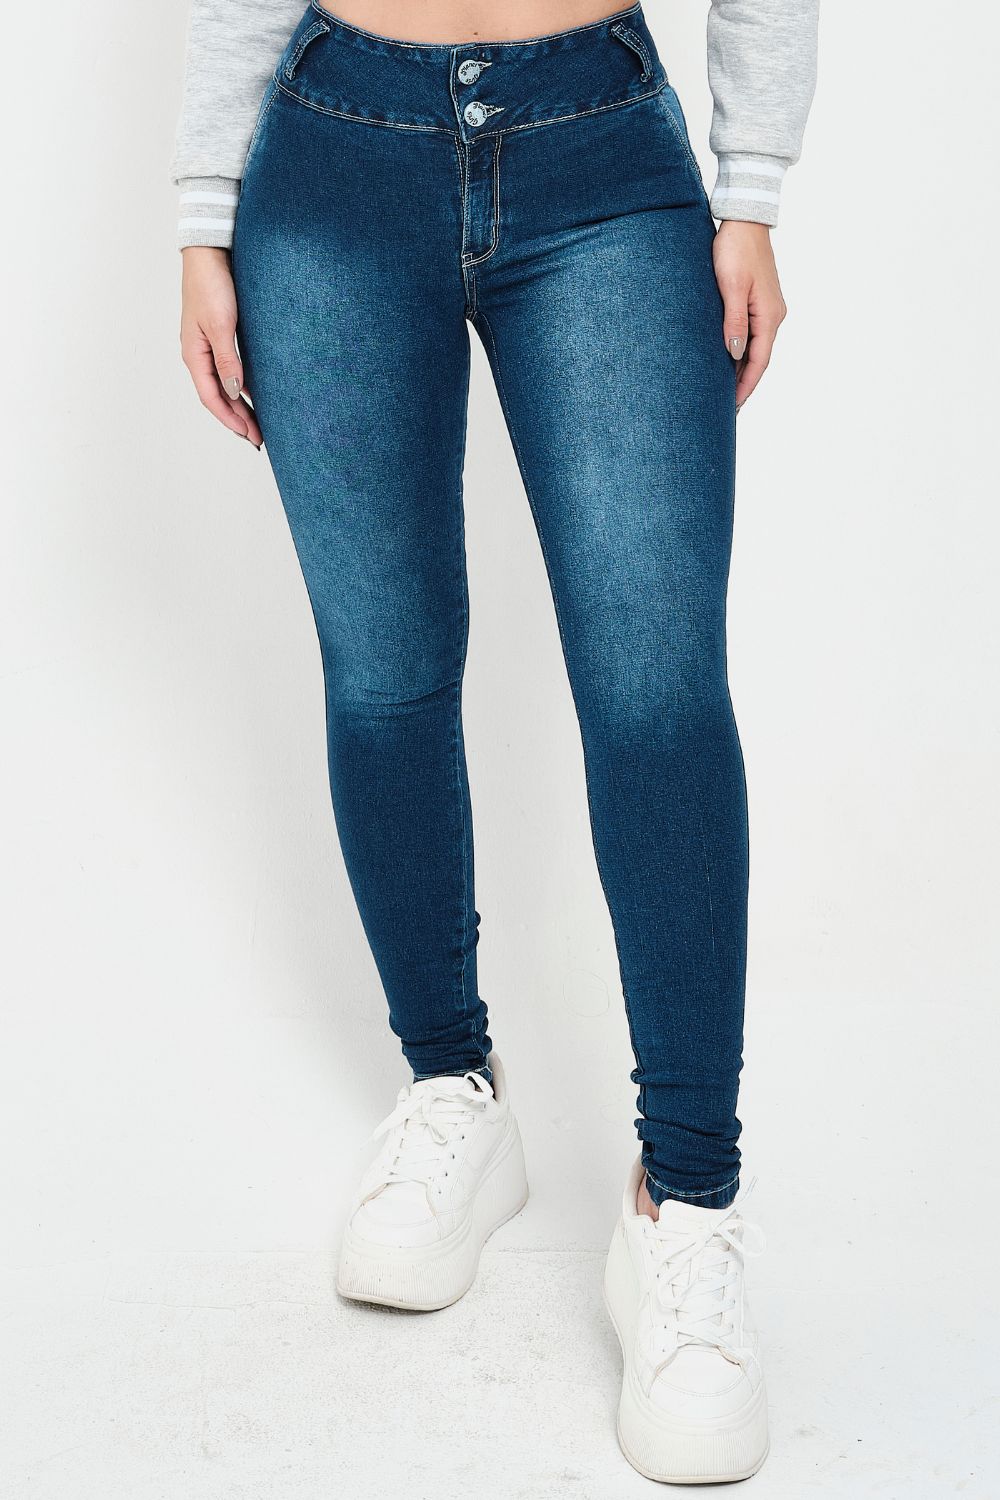 01053096_018_2-PG-CALCA-JEANS-HYDRA-JEANS-LAYLA